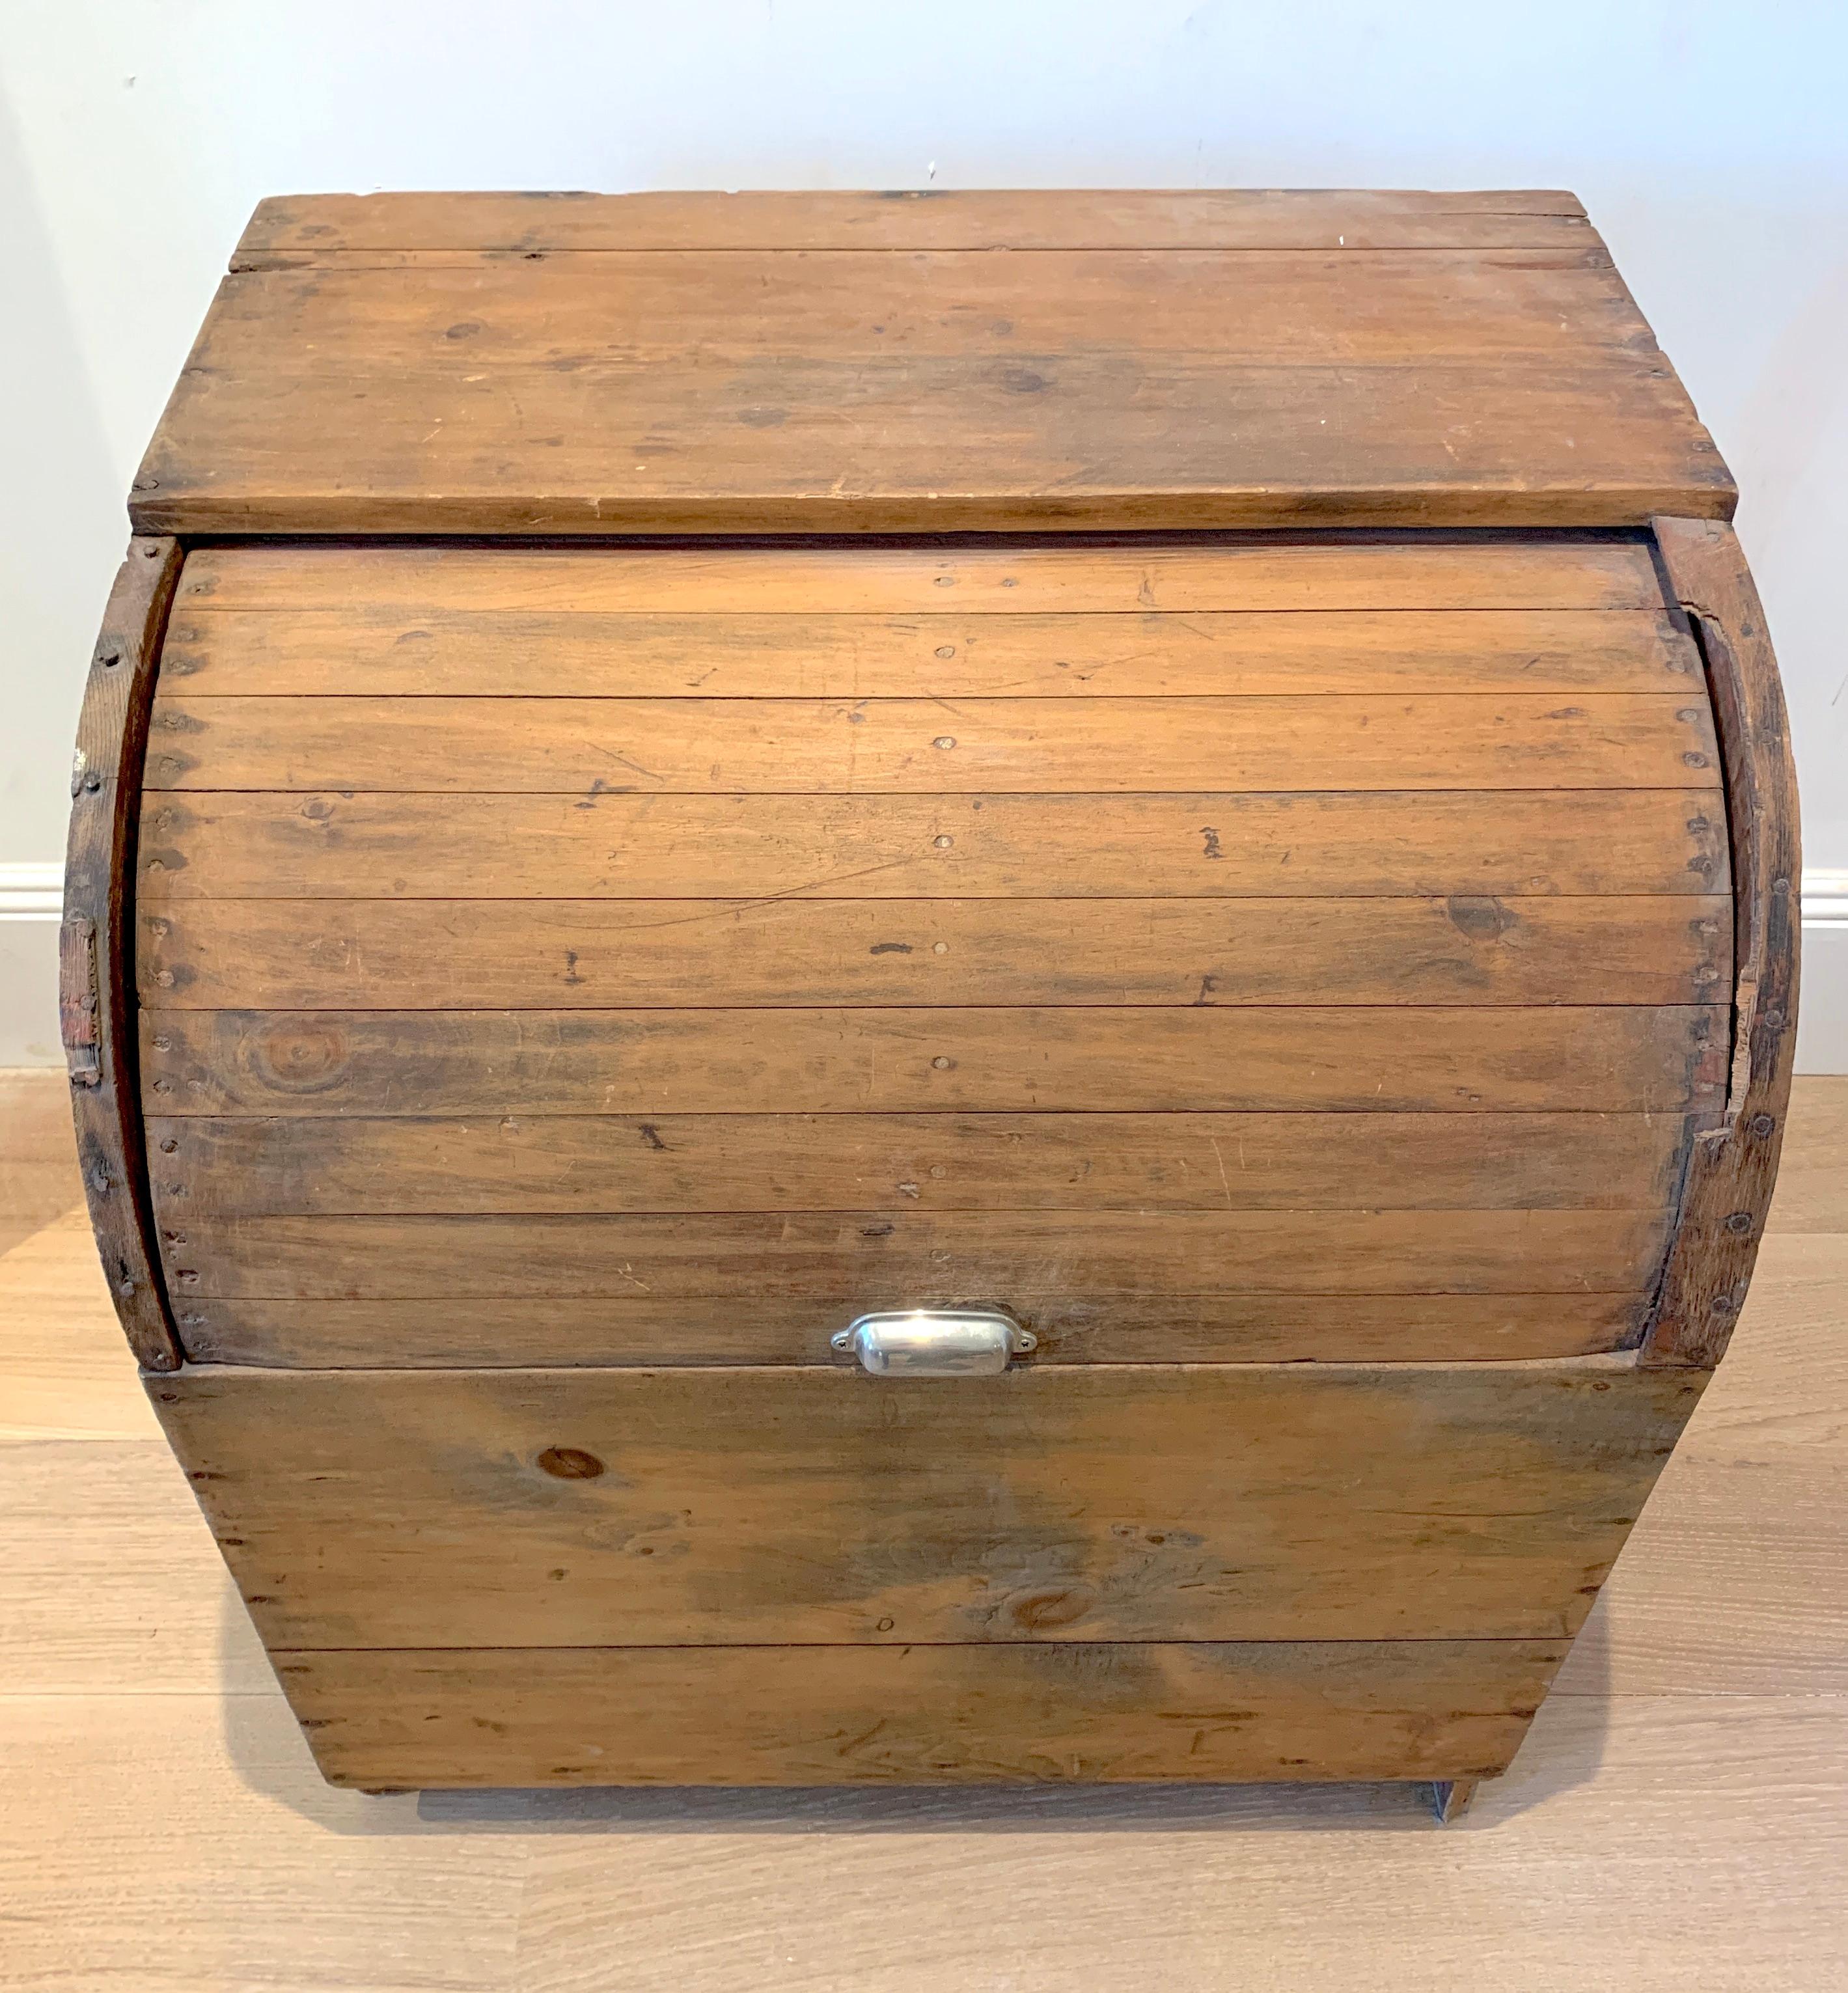 American Farmhouse Grain Bin Honey Brown Natural Matte Rustic Wood 1920s Vintage. Preserved with light sand-blast. A sturdy and functional piece that stands on it's own as Americana Art. Place in living room, hallway, bedroom or laundry room. Not